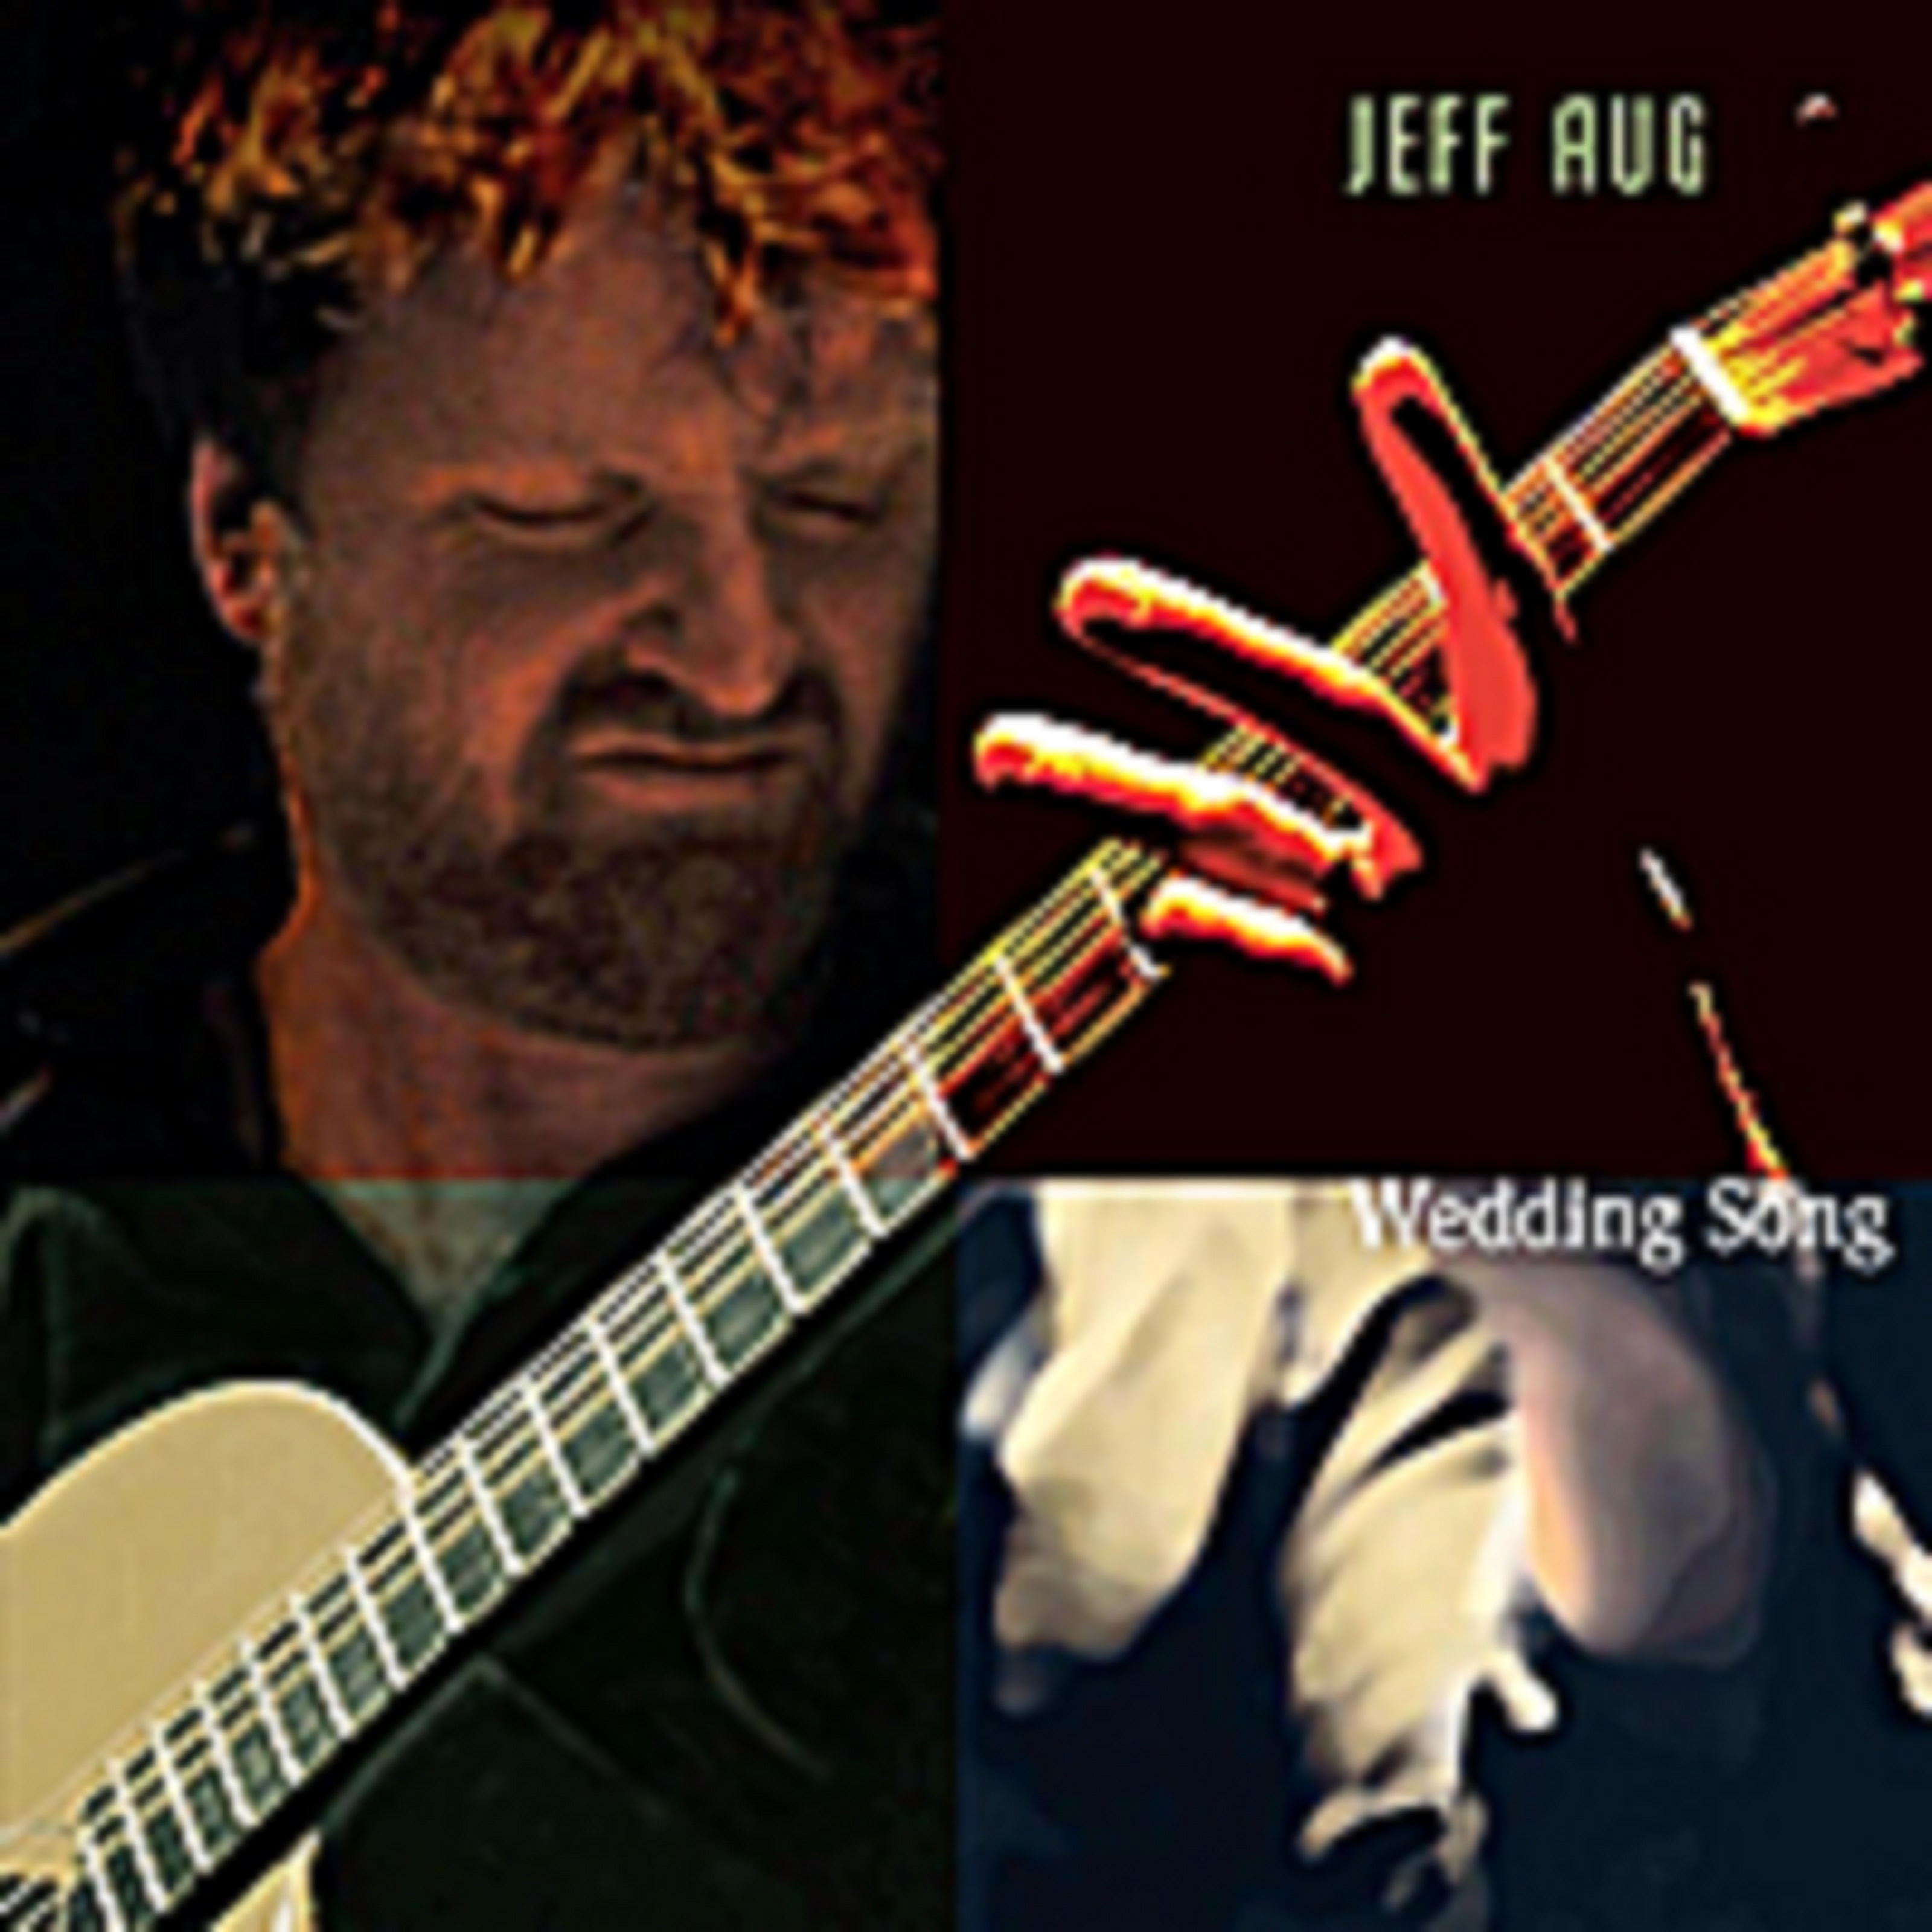 Jeff Aug | Wedding Song | New Music Review